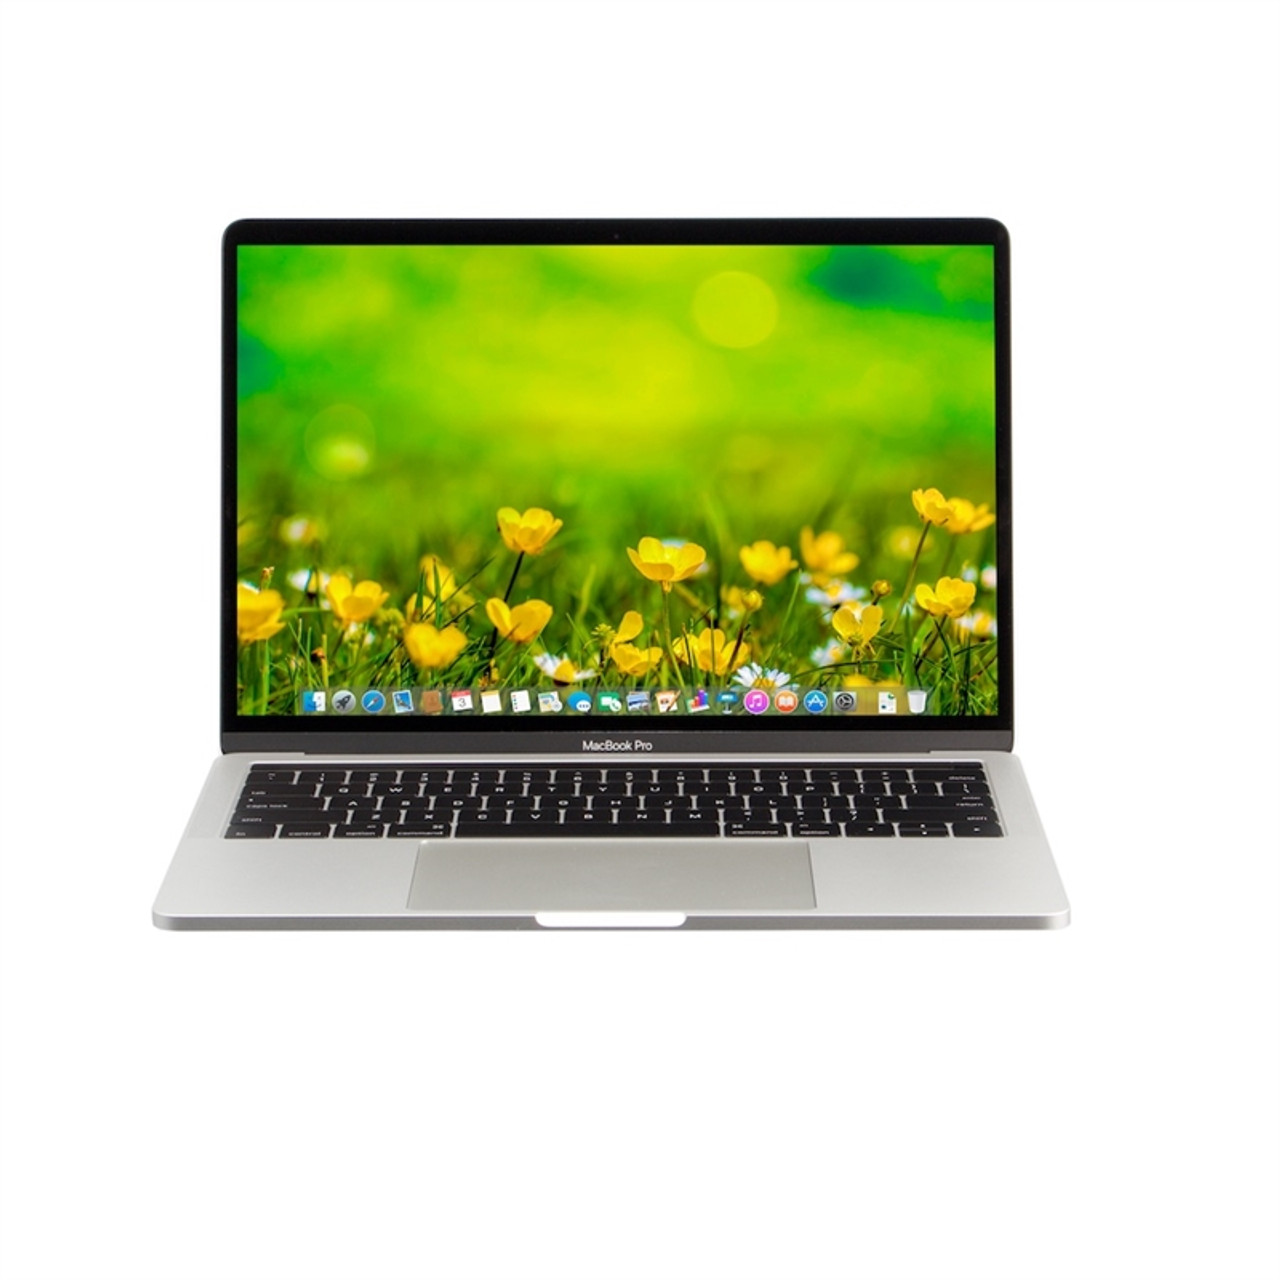 Apple MacBook Pro  inch 2.9GHz Core i5 Late , Silver with Touch Bar  MLVP2LL/A 1   Excellent Condition